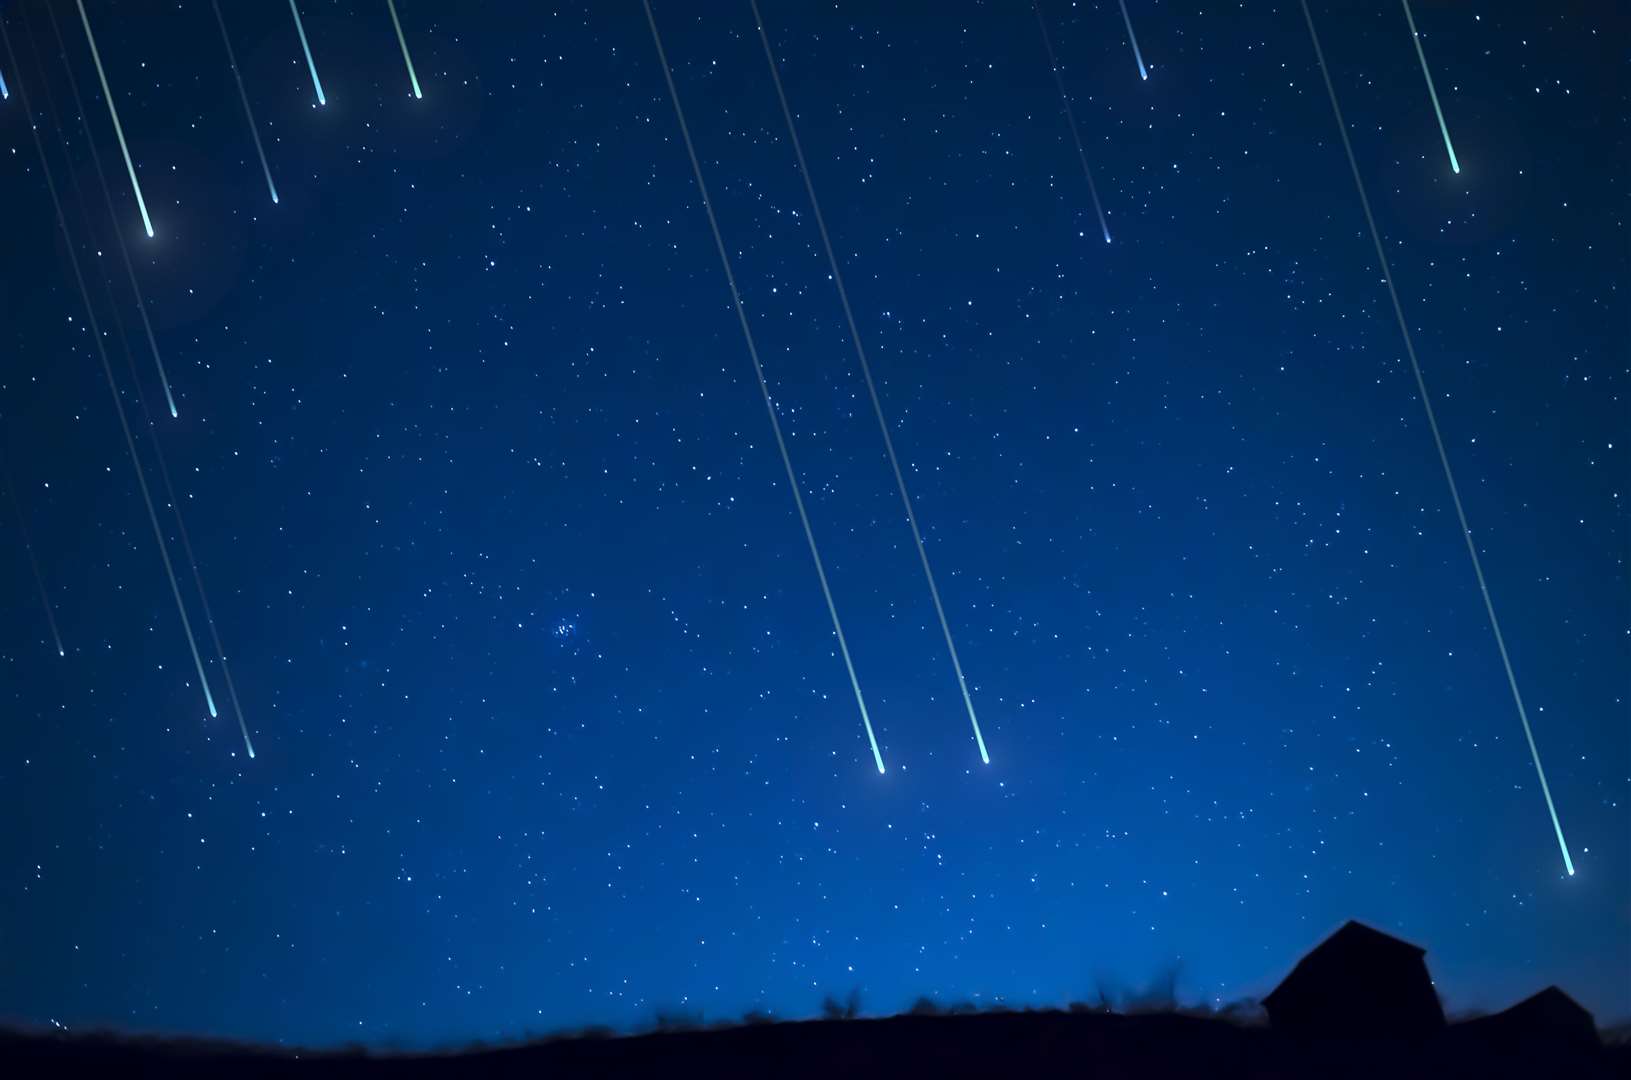 The Leonids meteor shower takes place every November. Picture: Adobe stock image.